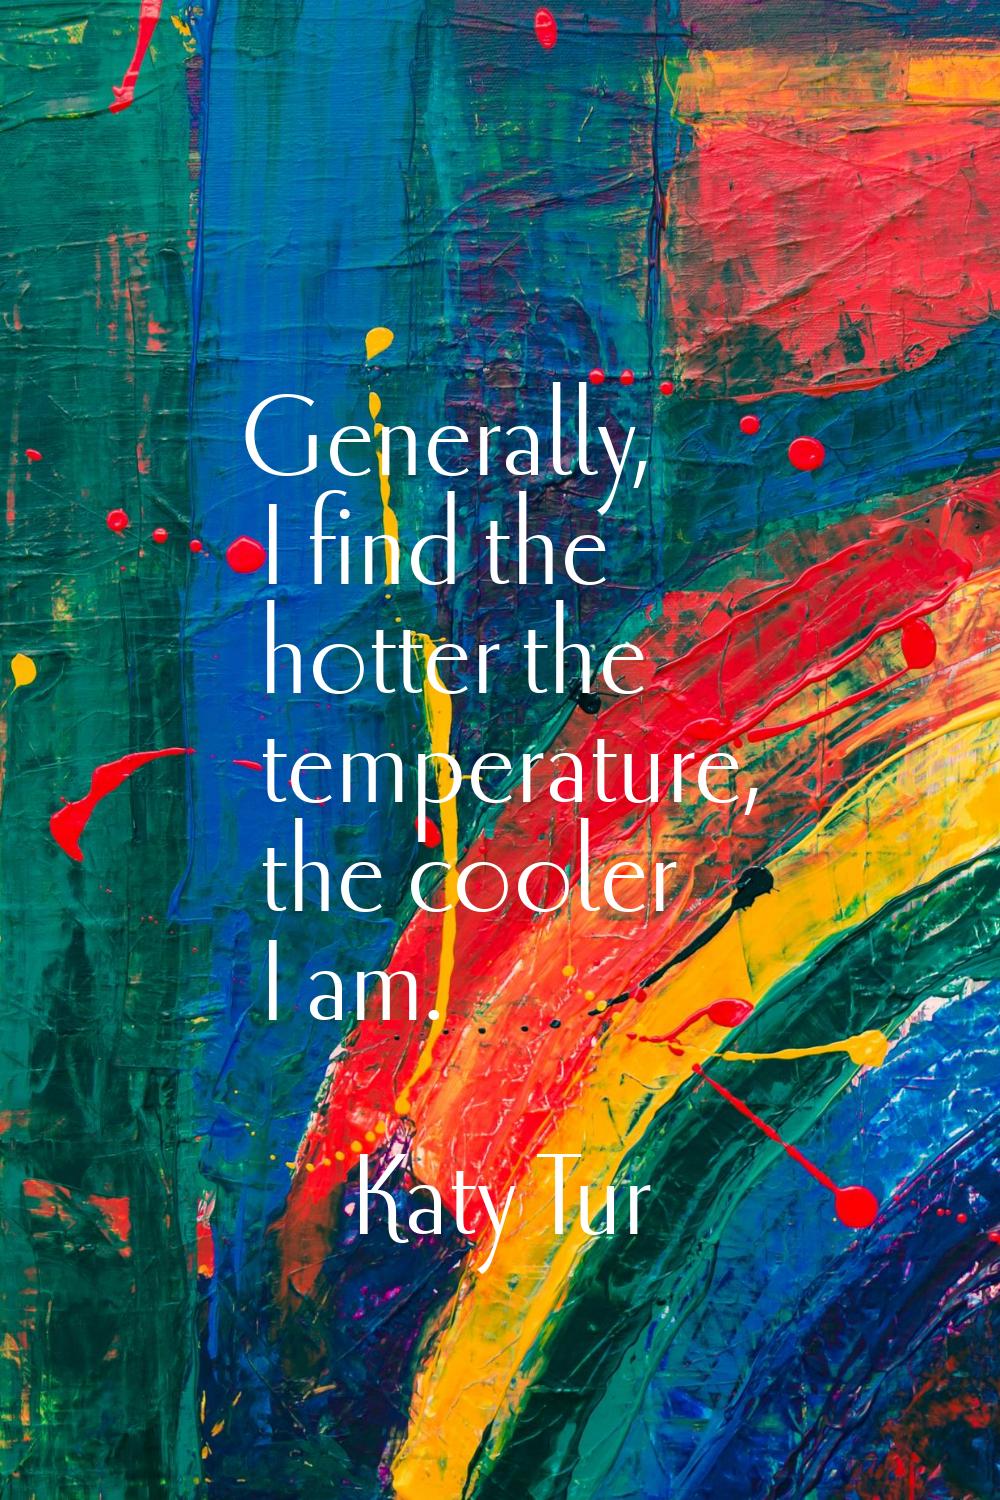 Generally, I find the hotter the temperature, the cooler I am.